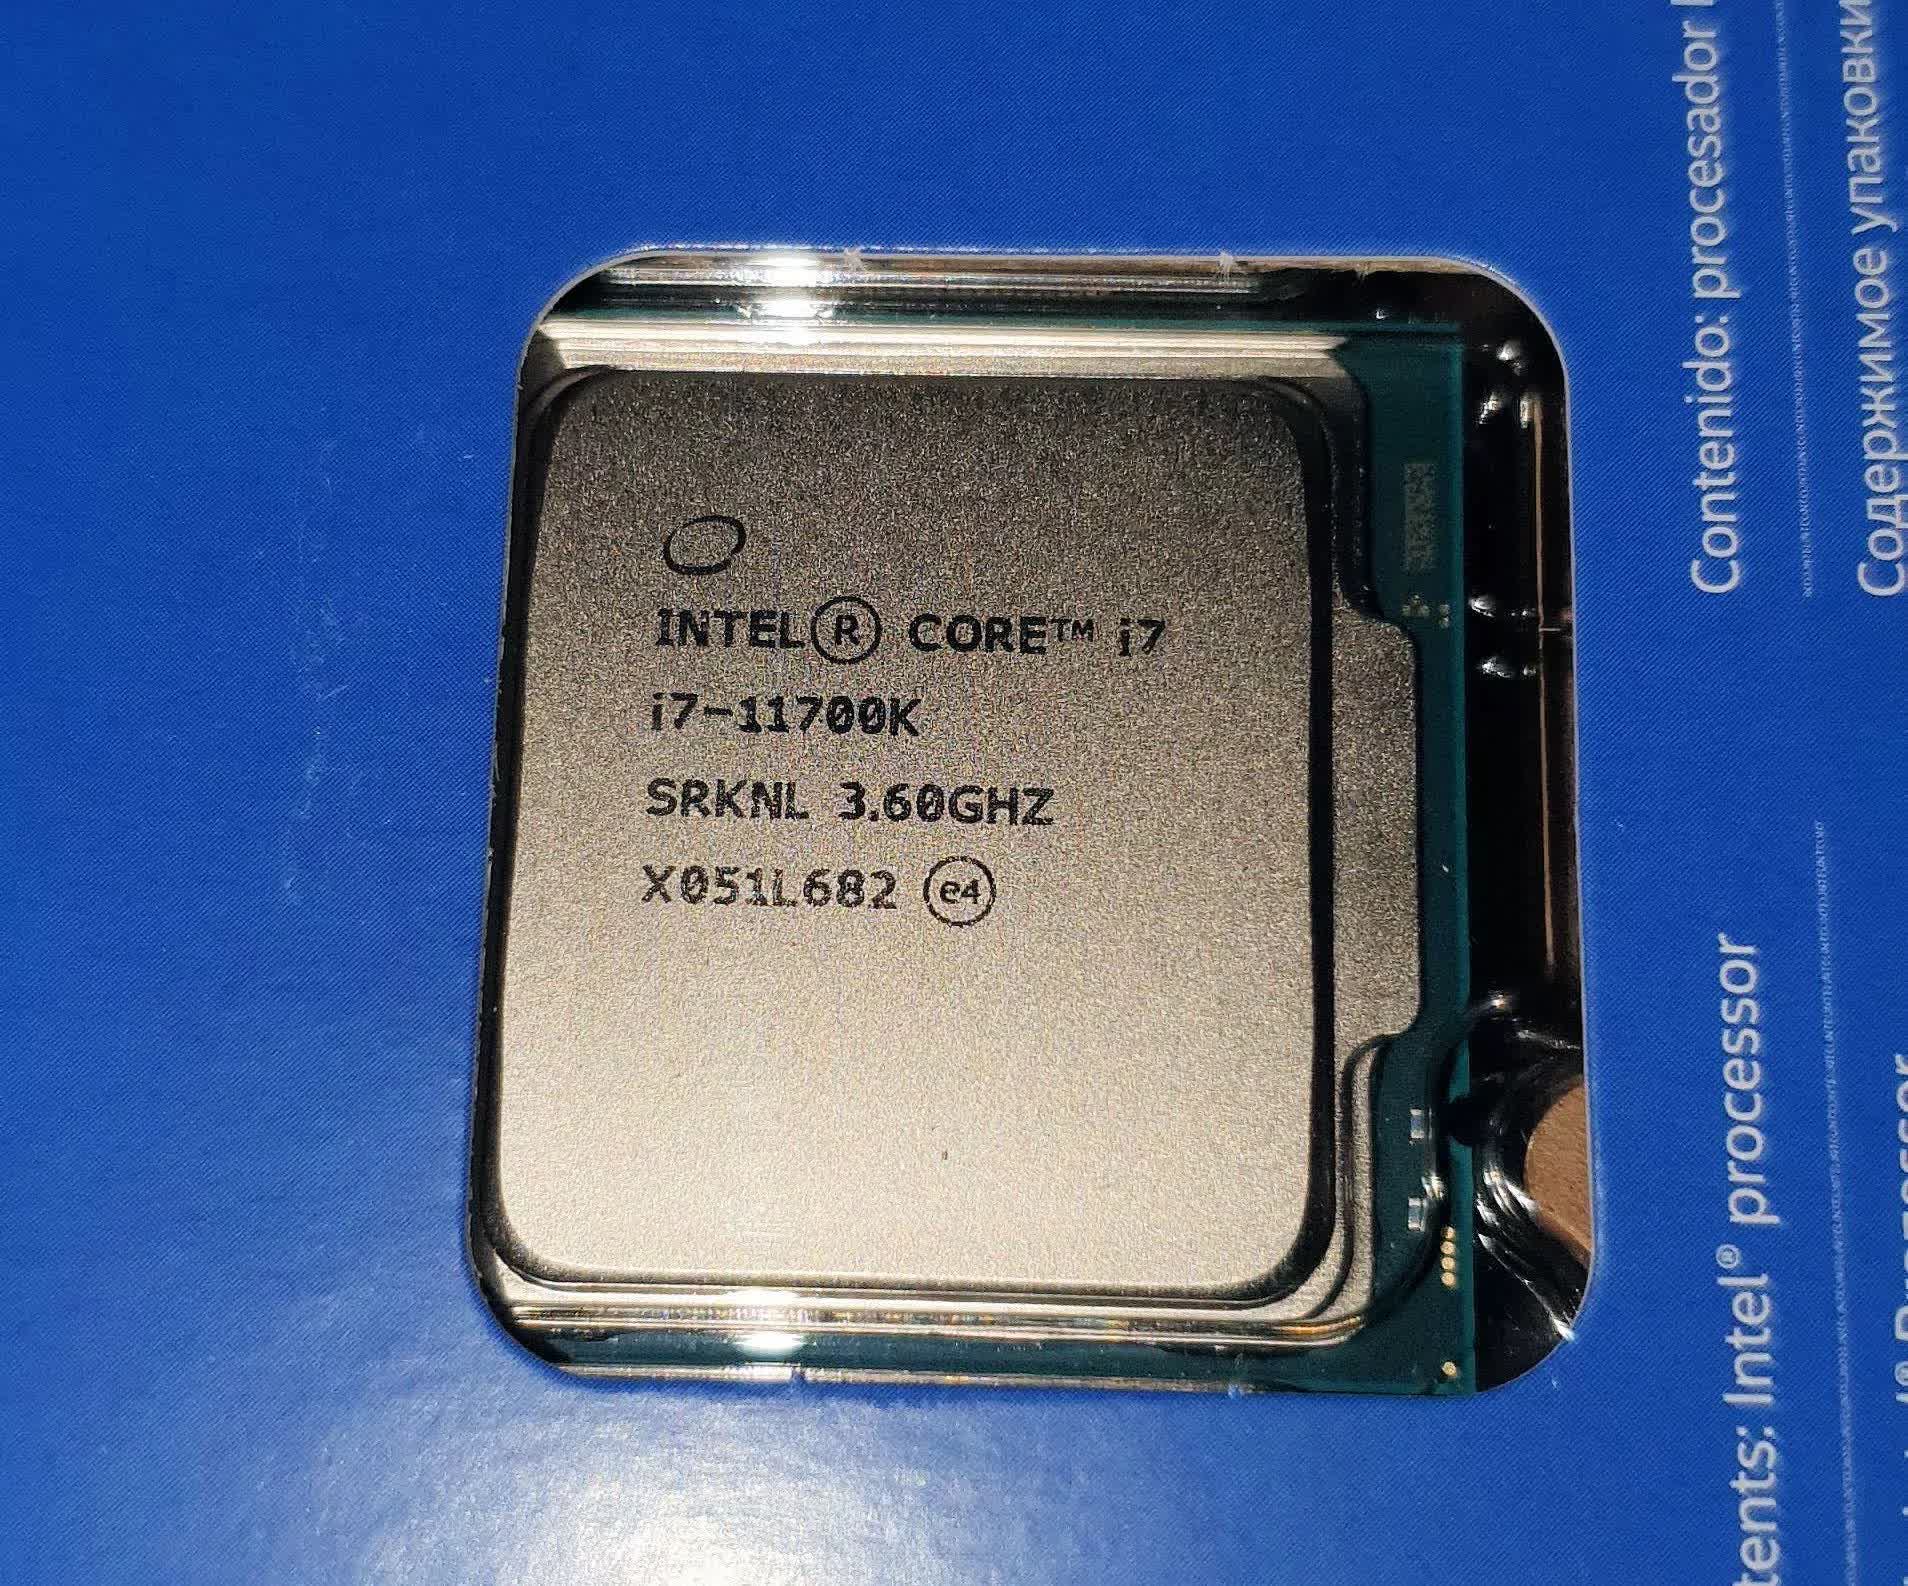 Intel's Rocket Lake Core i9-11900K and i7-11700K expected to offer roughly the same performance